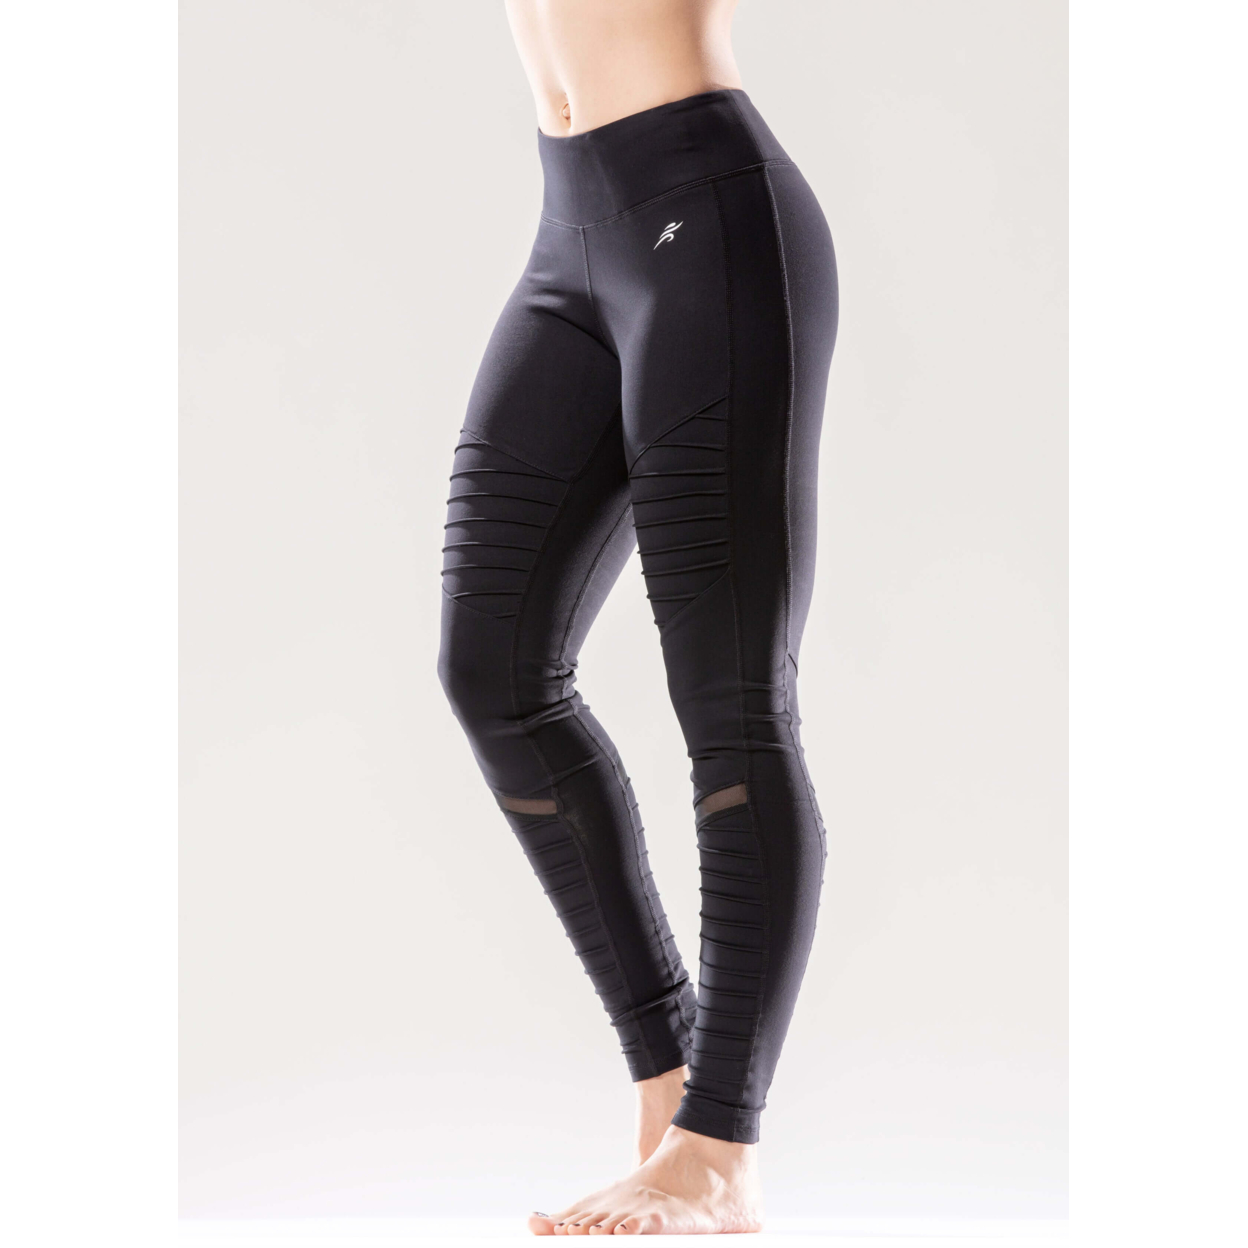 Athletique Low-Waisted Ribbed Leggings With Hidden Pocket And Mesh Panels - Black, 2X-Small